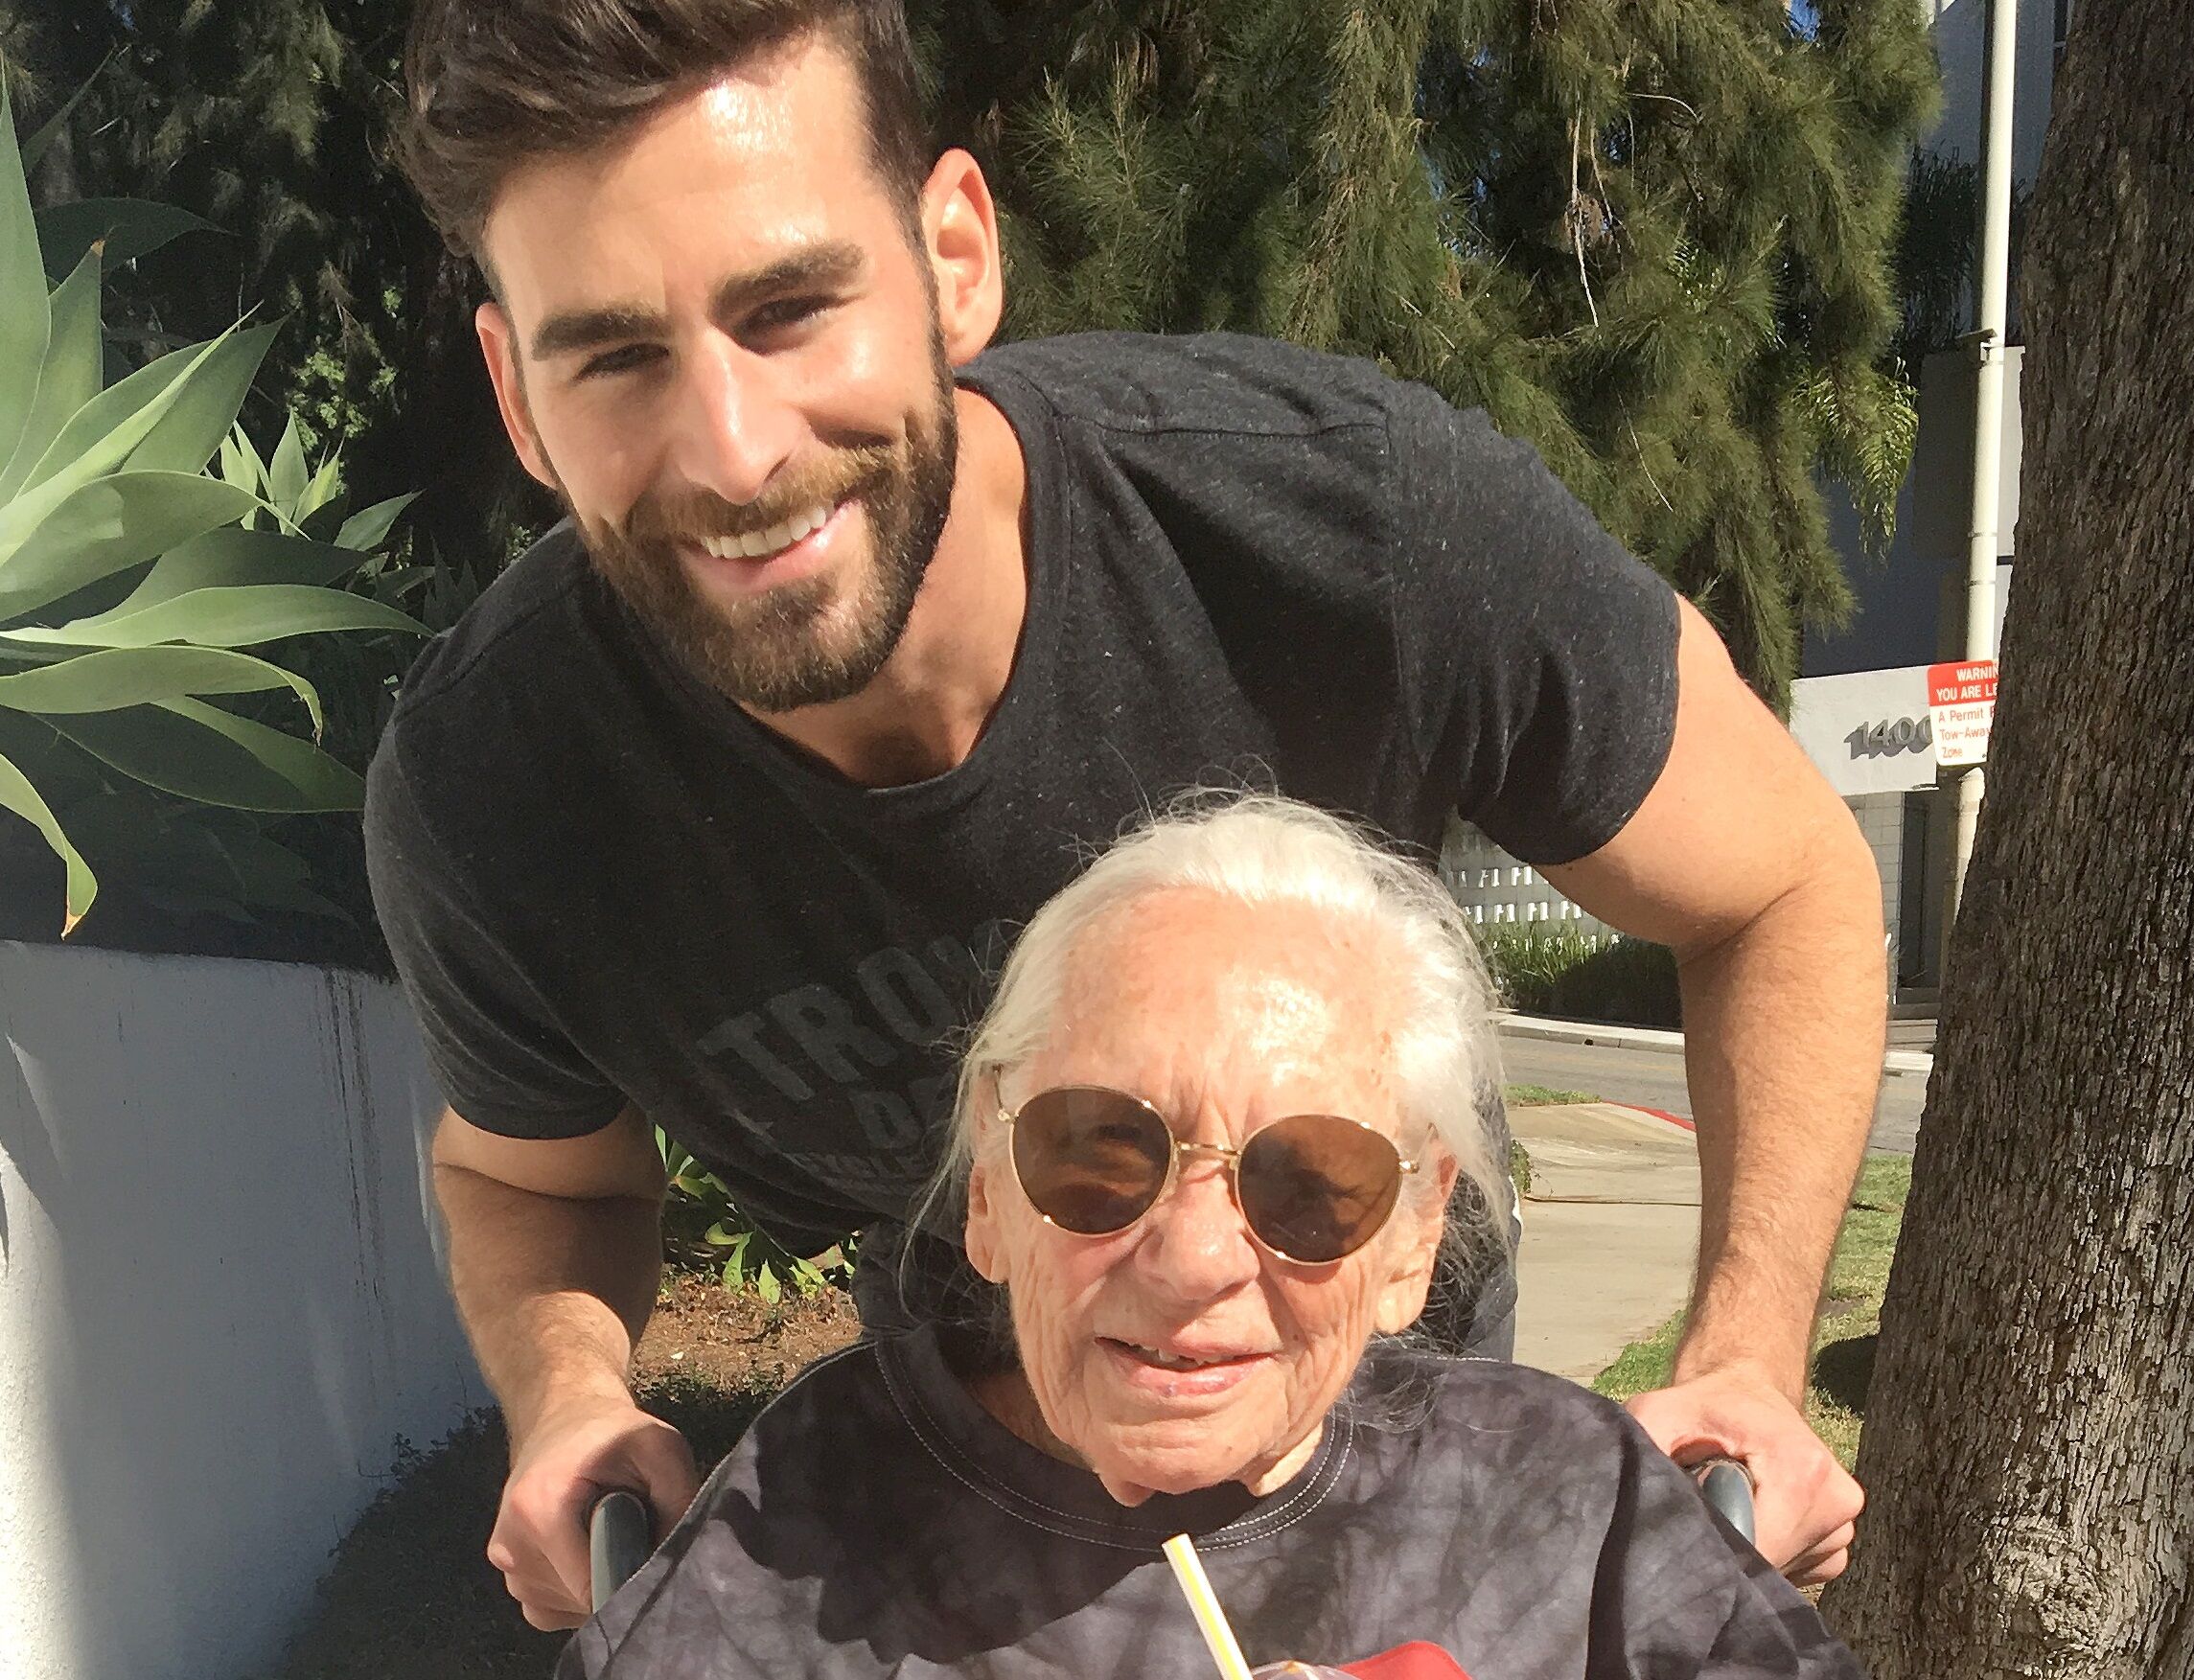 Chris Salvatore generously took care of his elderly neighbor until she died